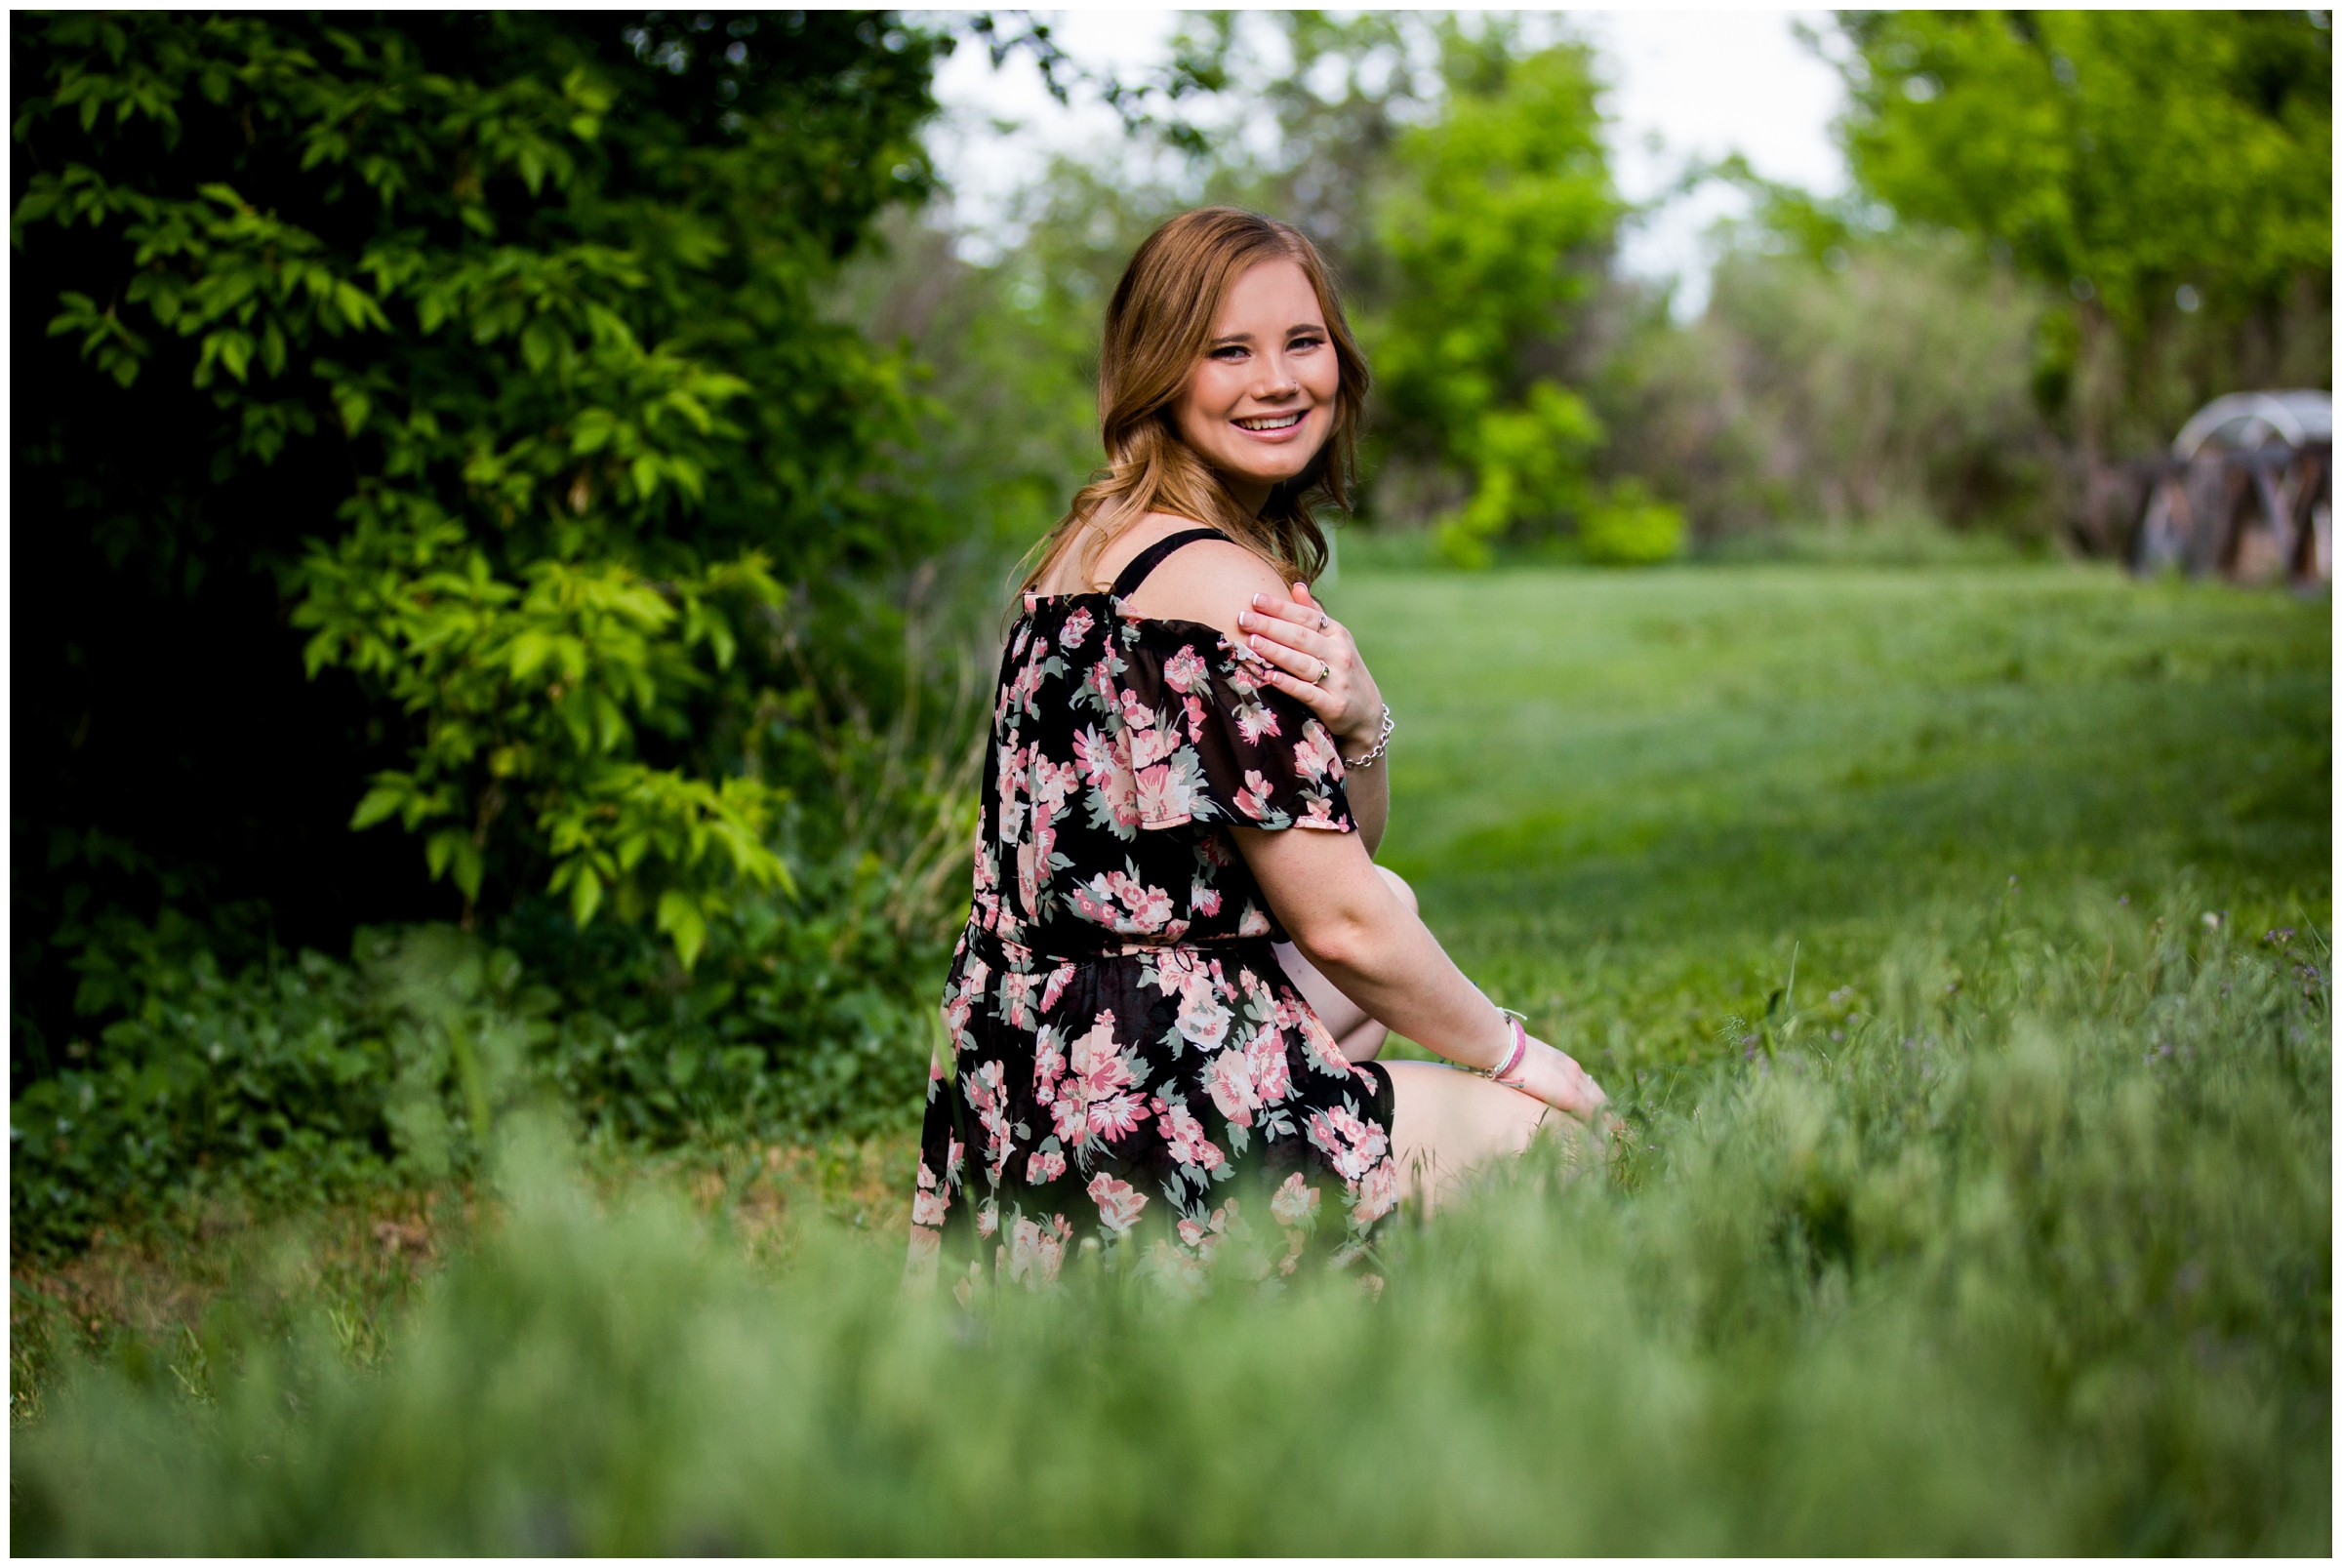 teen girl squatting in grass during Colorado summer portrait photography session 